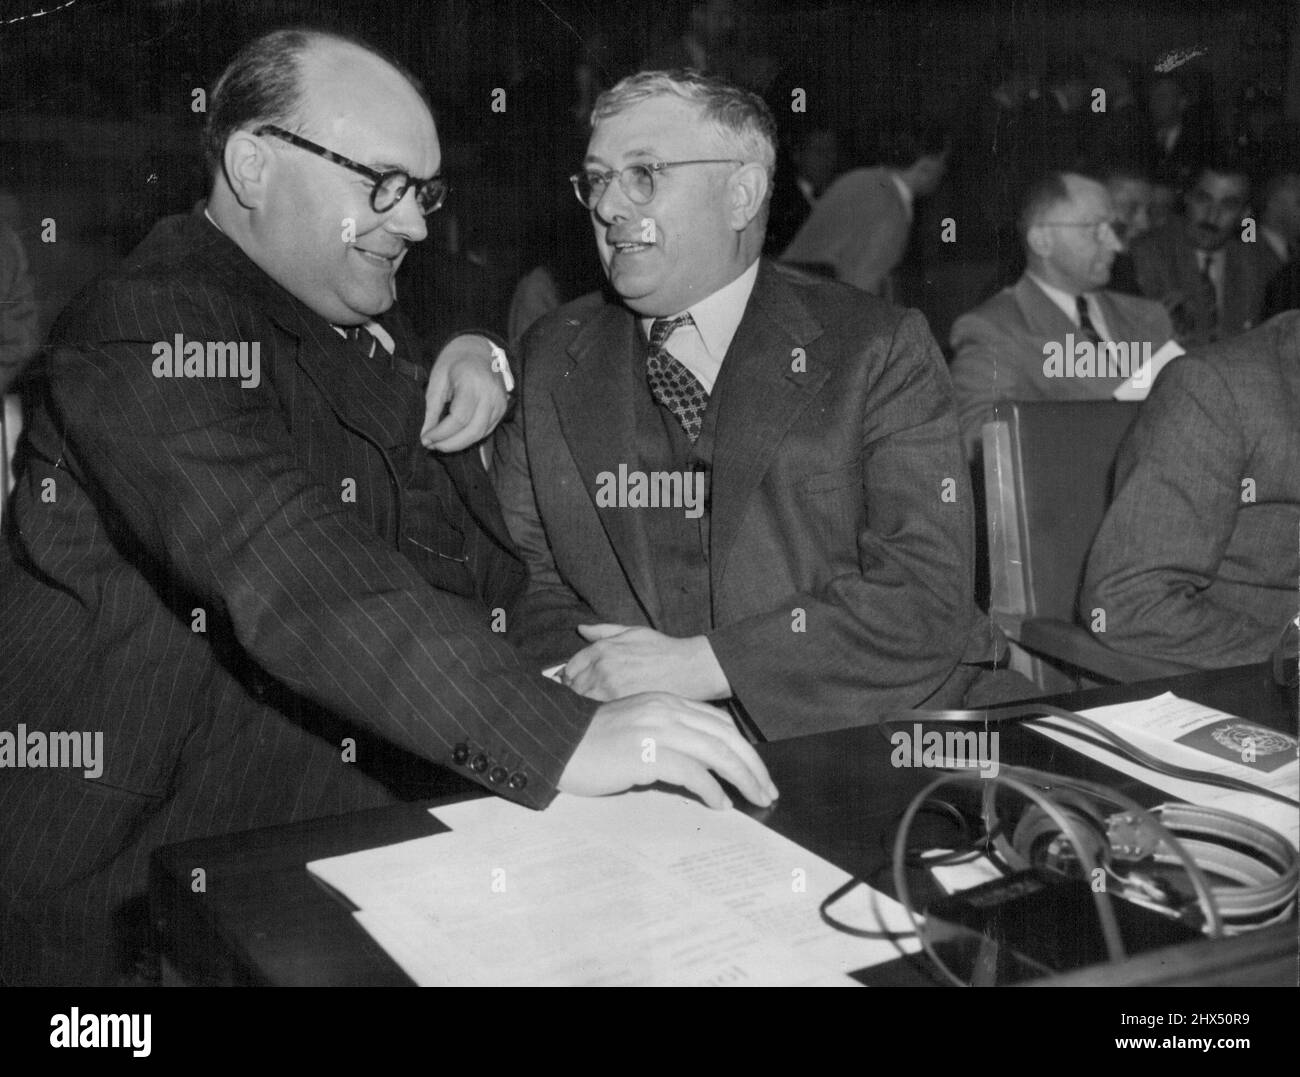 Spaak and Evatt Chat - Paul-Henri Spaak (left), Prime Minister Of Belgium, and H.V. Evatt, Australia' s Minister for External Affairs, enjoy a chat during United Nations General Assembly Meeting at Flushing Meadows, N.Y., Sept. 16. United Nations Talk - The Minister for External Affairs (Dr. Evatt) enjoys a chat with the Prime Minster of Belgium (M. Spaak) during the United Nations General Assembly meeting in New York. October 04, 1947. (Photo by Associated Press Photo). Stock Photo